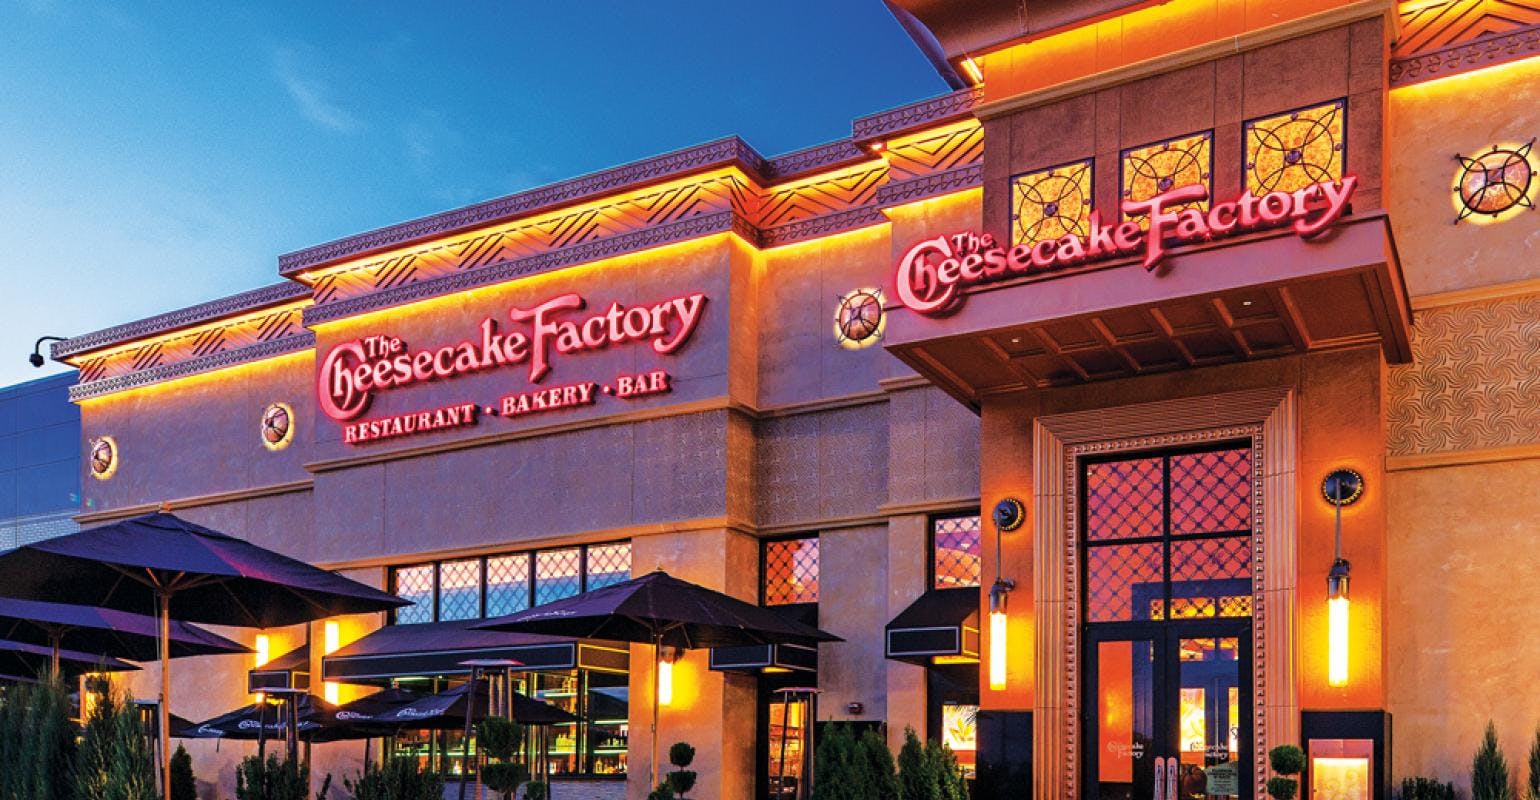 Cheesecake Factory 1633978049 1633978050 ?fit=crop&ar=1.91 1